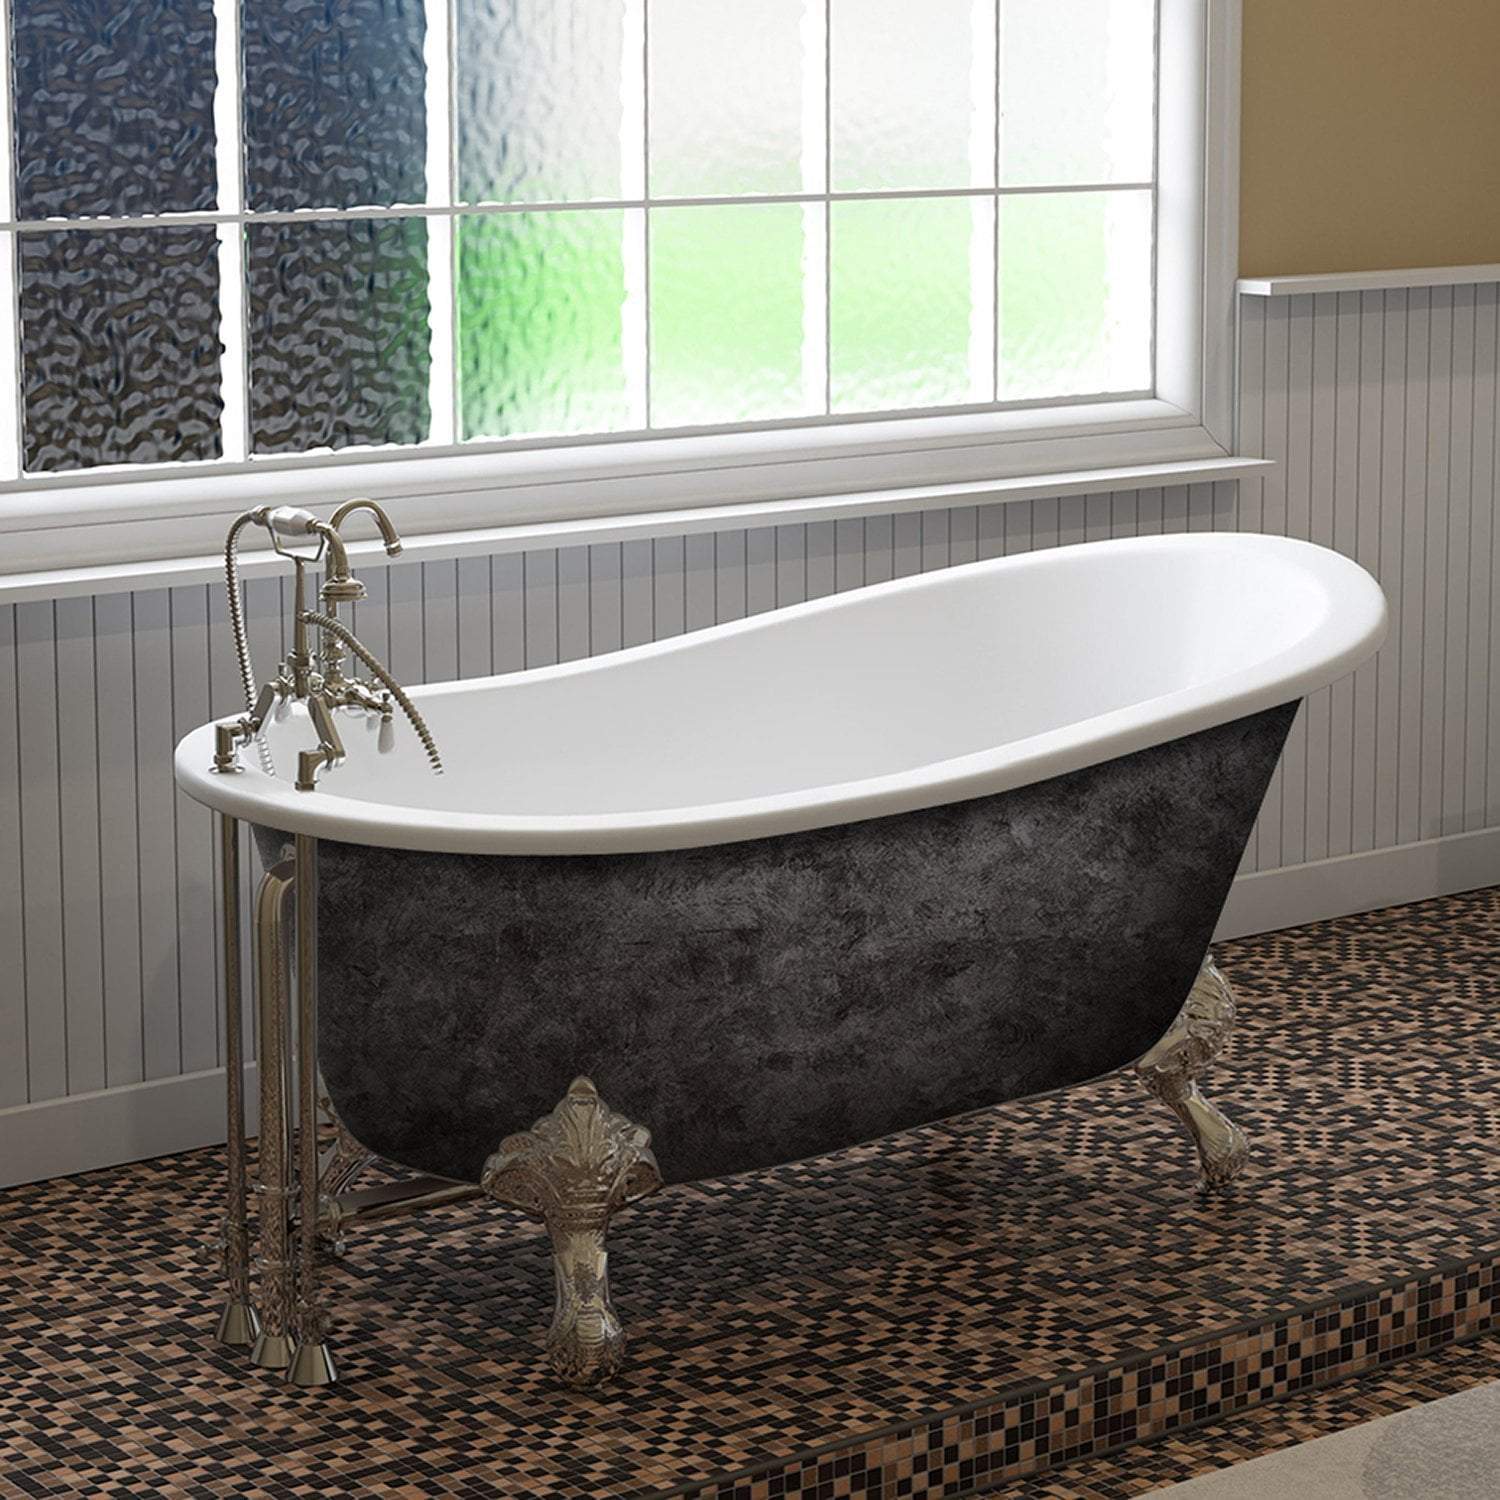 Scorched Platinum 61” x 30” Cast Iron Slipper Bathtub with 7” Deck Mount Faucet Holes and Polished Chrome Feet